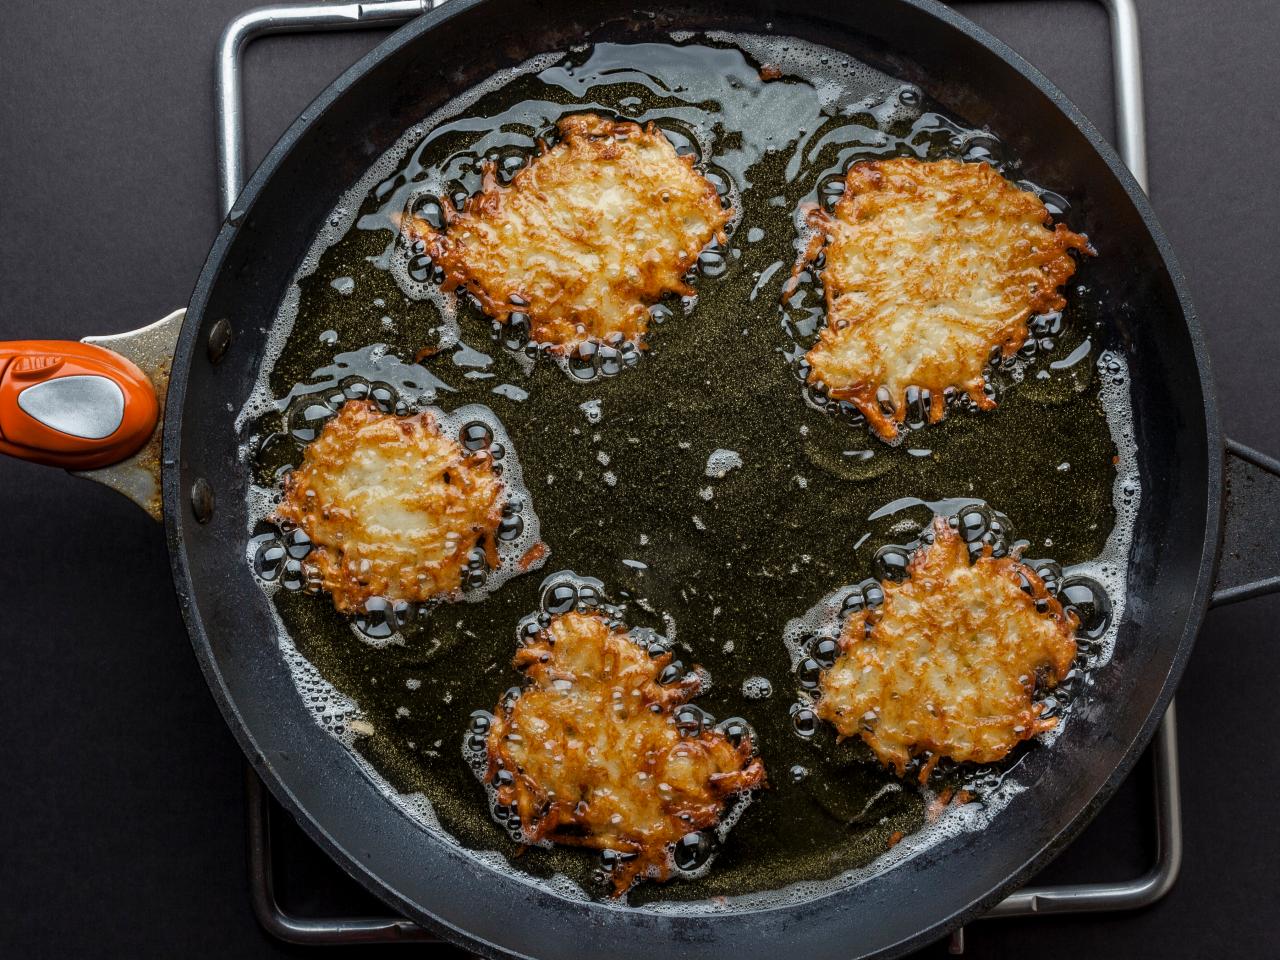 My wife deep fried some potato pancakes and I think it burned off